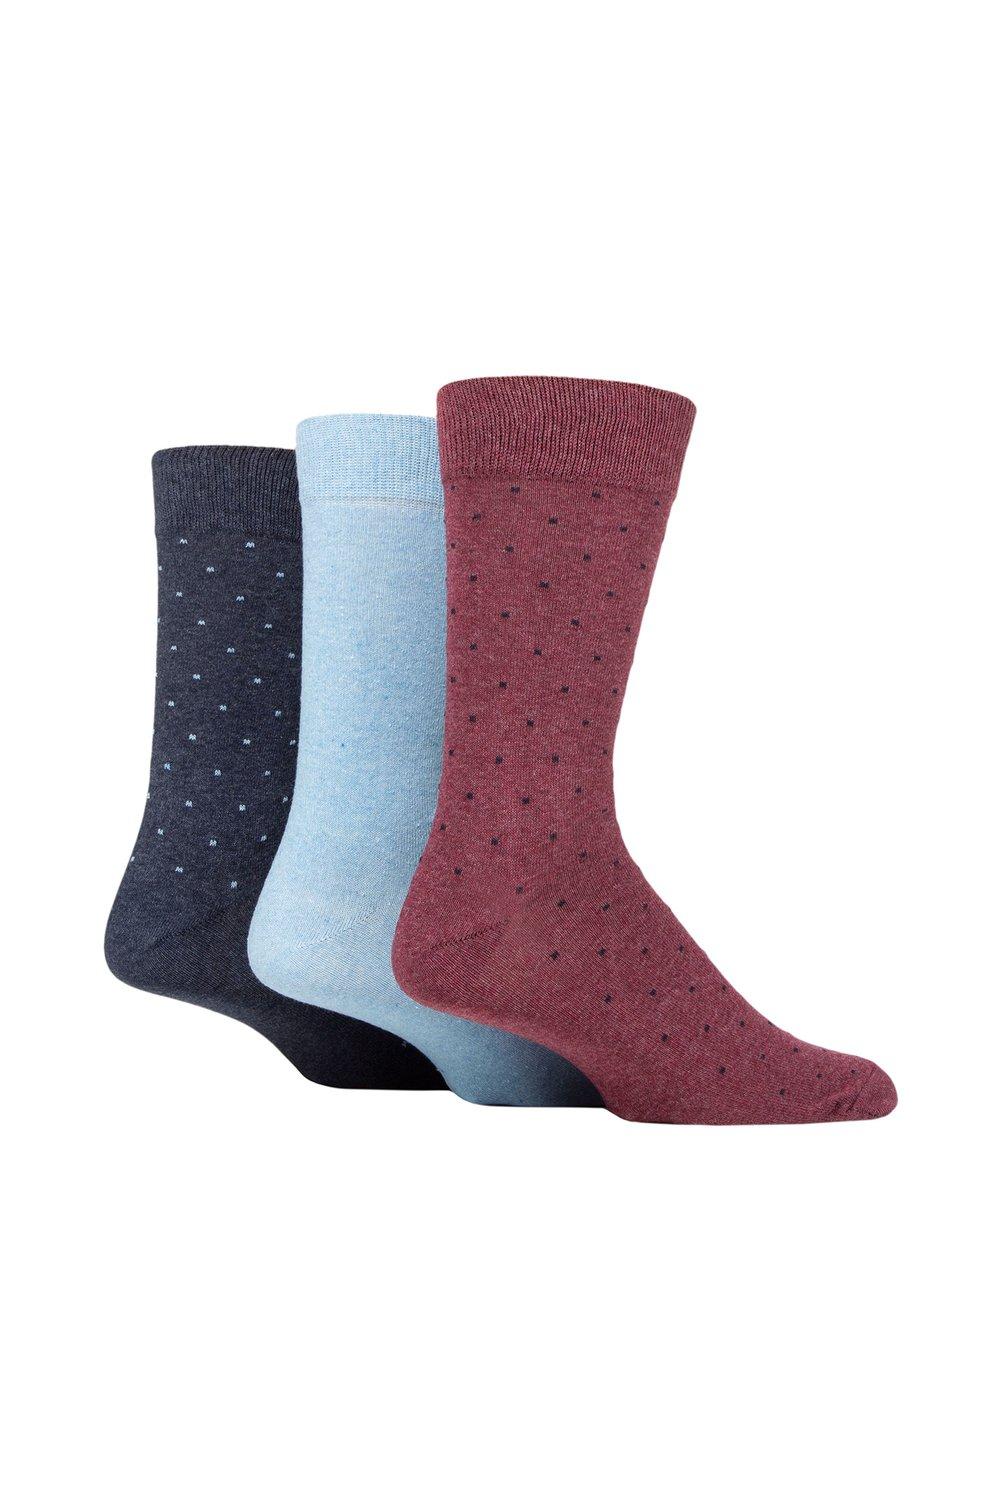 3 Pair 100% Recycled Dots Cotton Socks